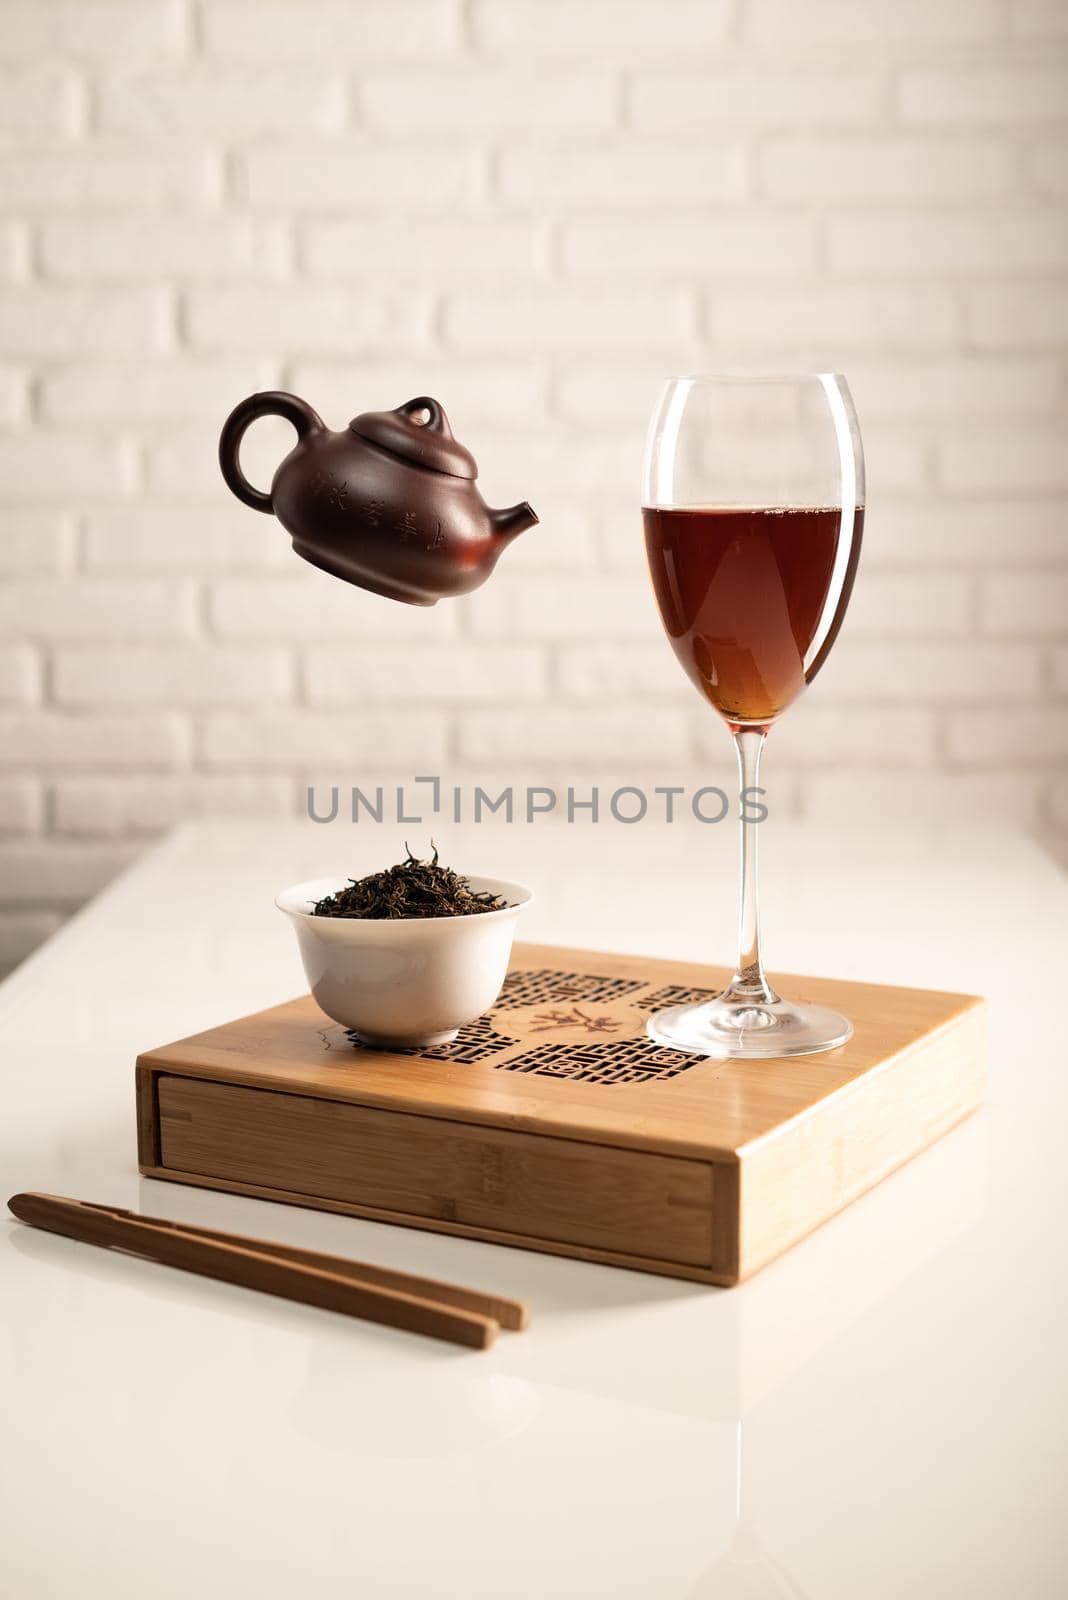 table with appliances and a wine glass in which tea is brewed